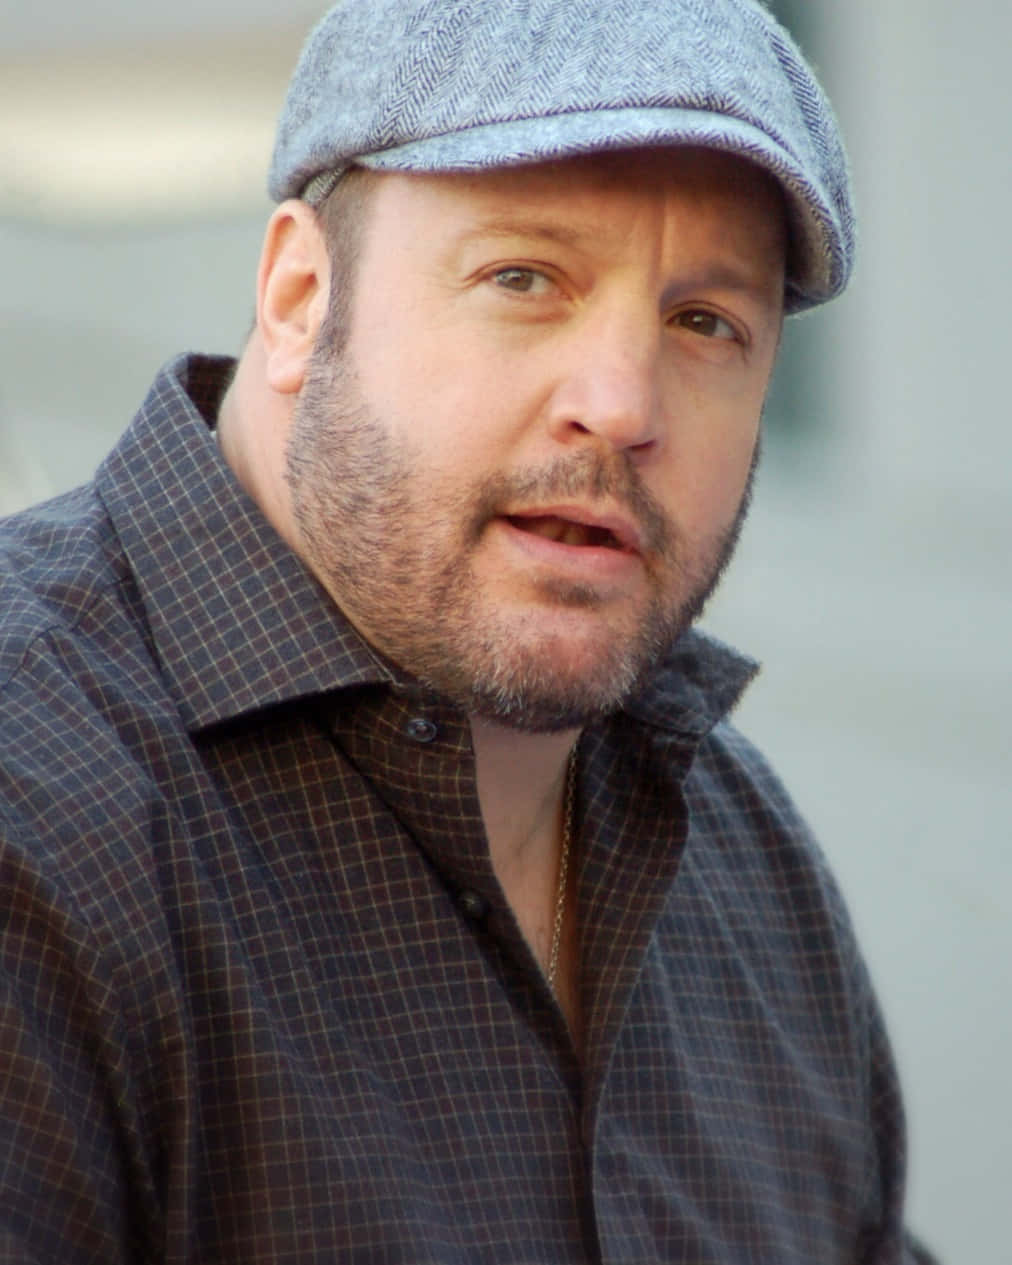 Actor Kevin James brings humor to the stage Wallpaper